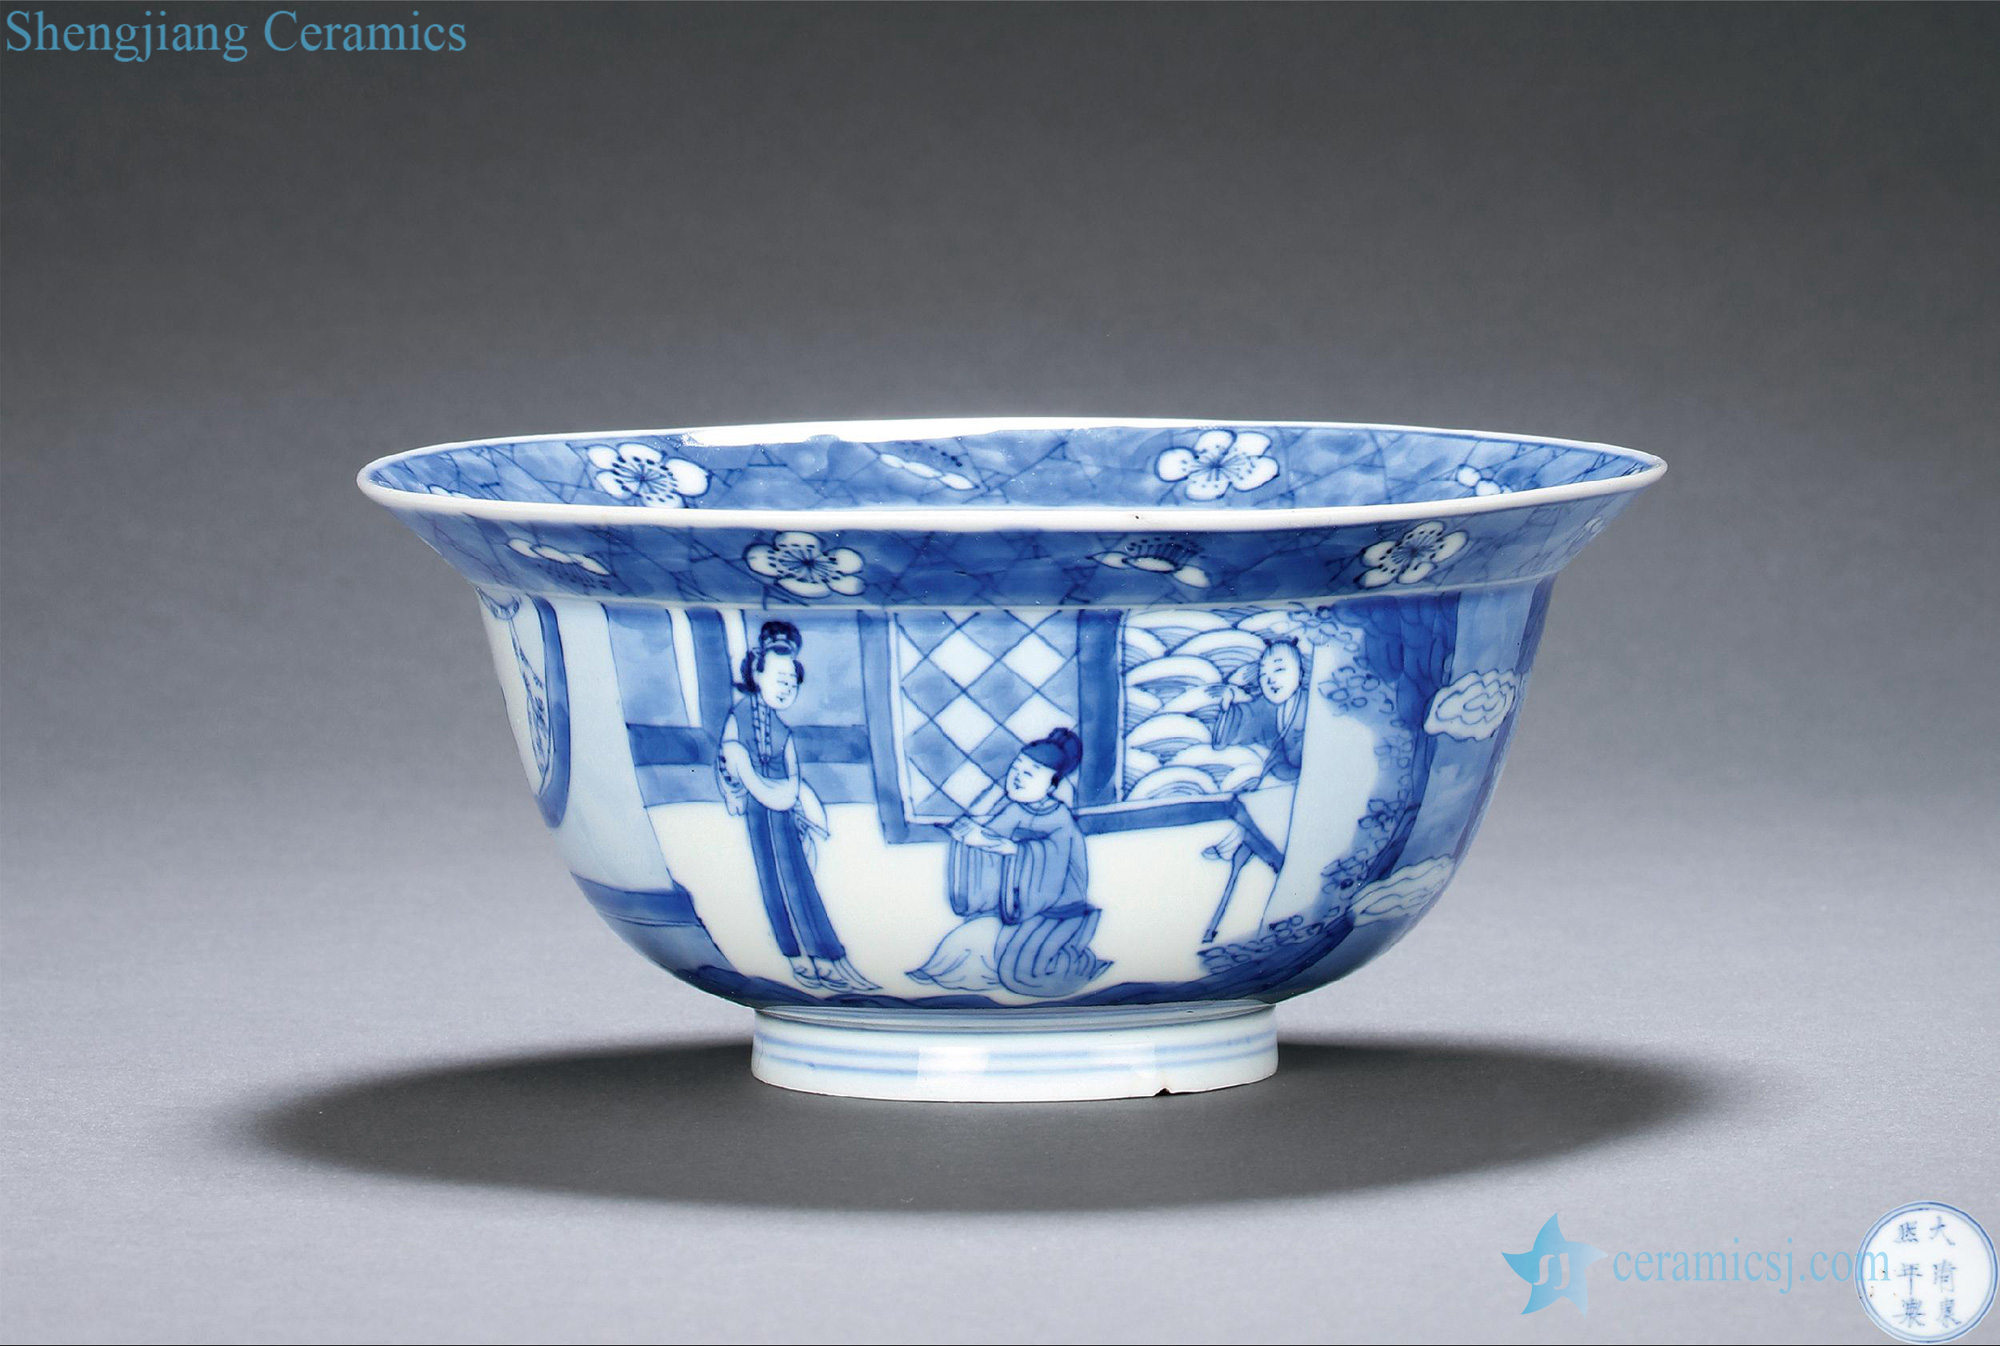 The qing emperor kangxi character story to fold along the bowl